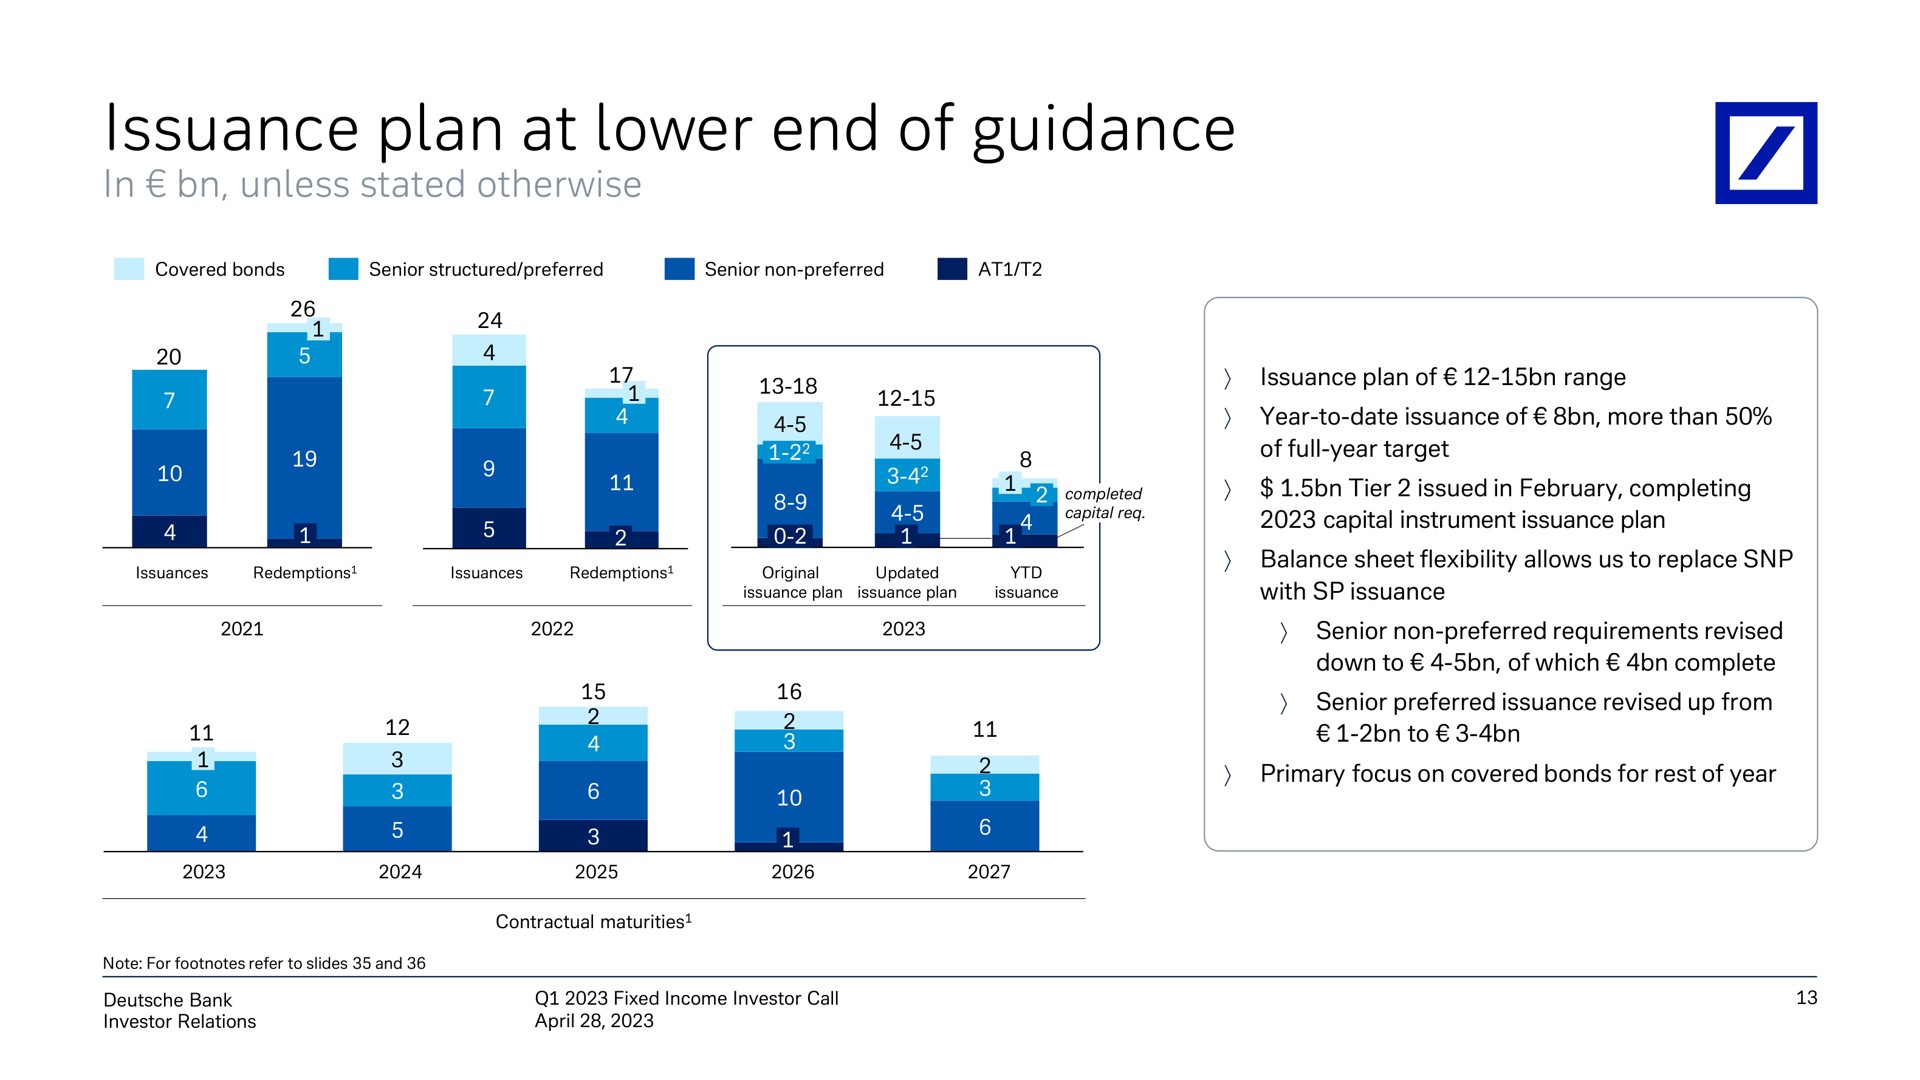 issuance plan at lower end of guidance | Deutsche Bank